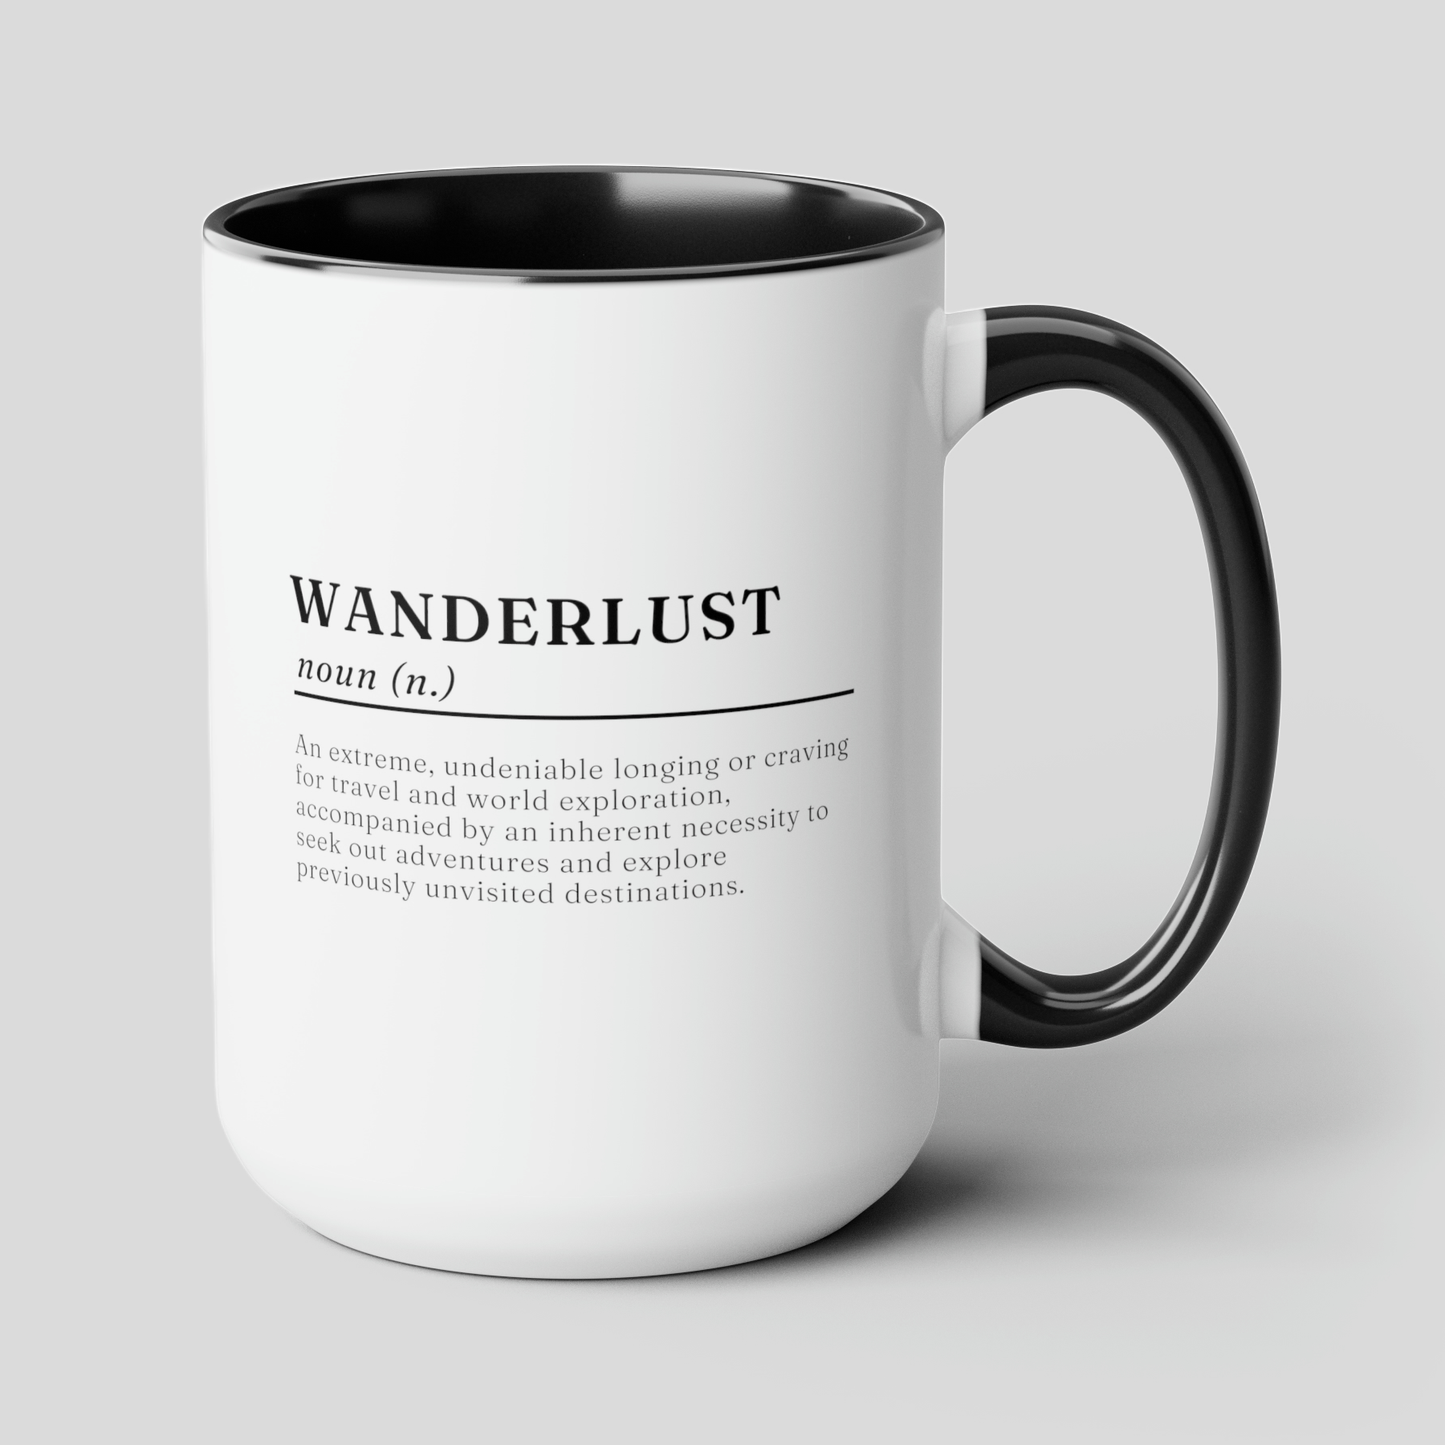 Wanderlust Definition 15oz white with black accent funny large coffee mug gift for traveler backpacker outdoors quote minimalist adventure waveywares wavey wares wavywares wavy wares cover